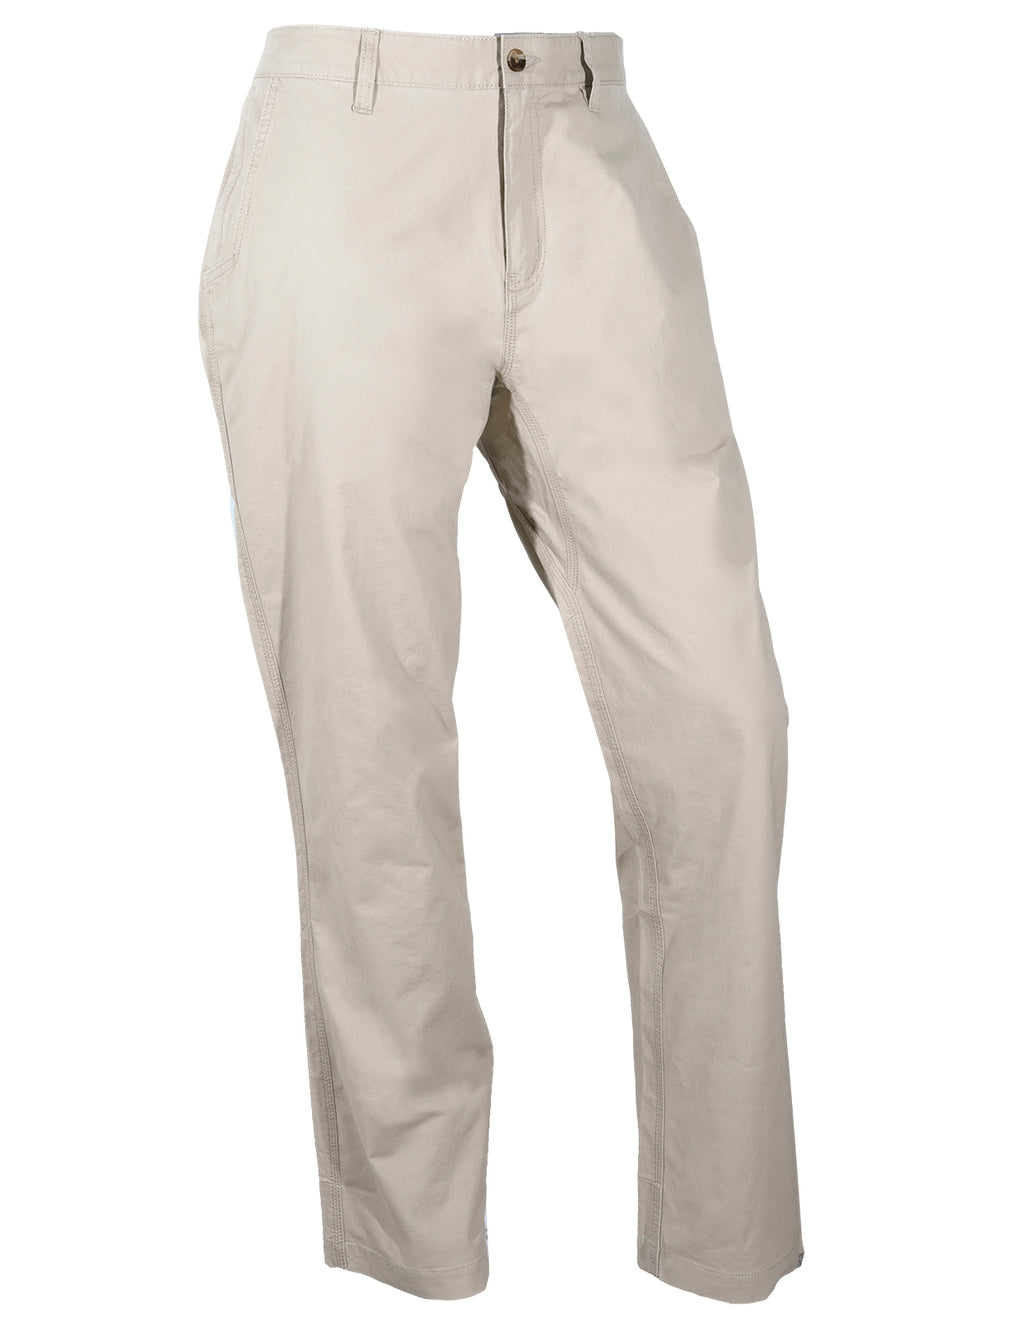 Men's Stretch Poplin Pant | Relaxed Fit / Oatmeal